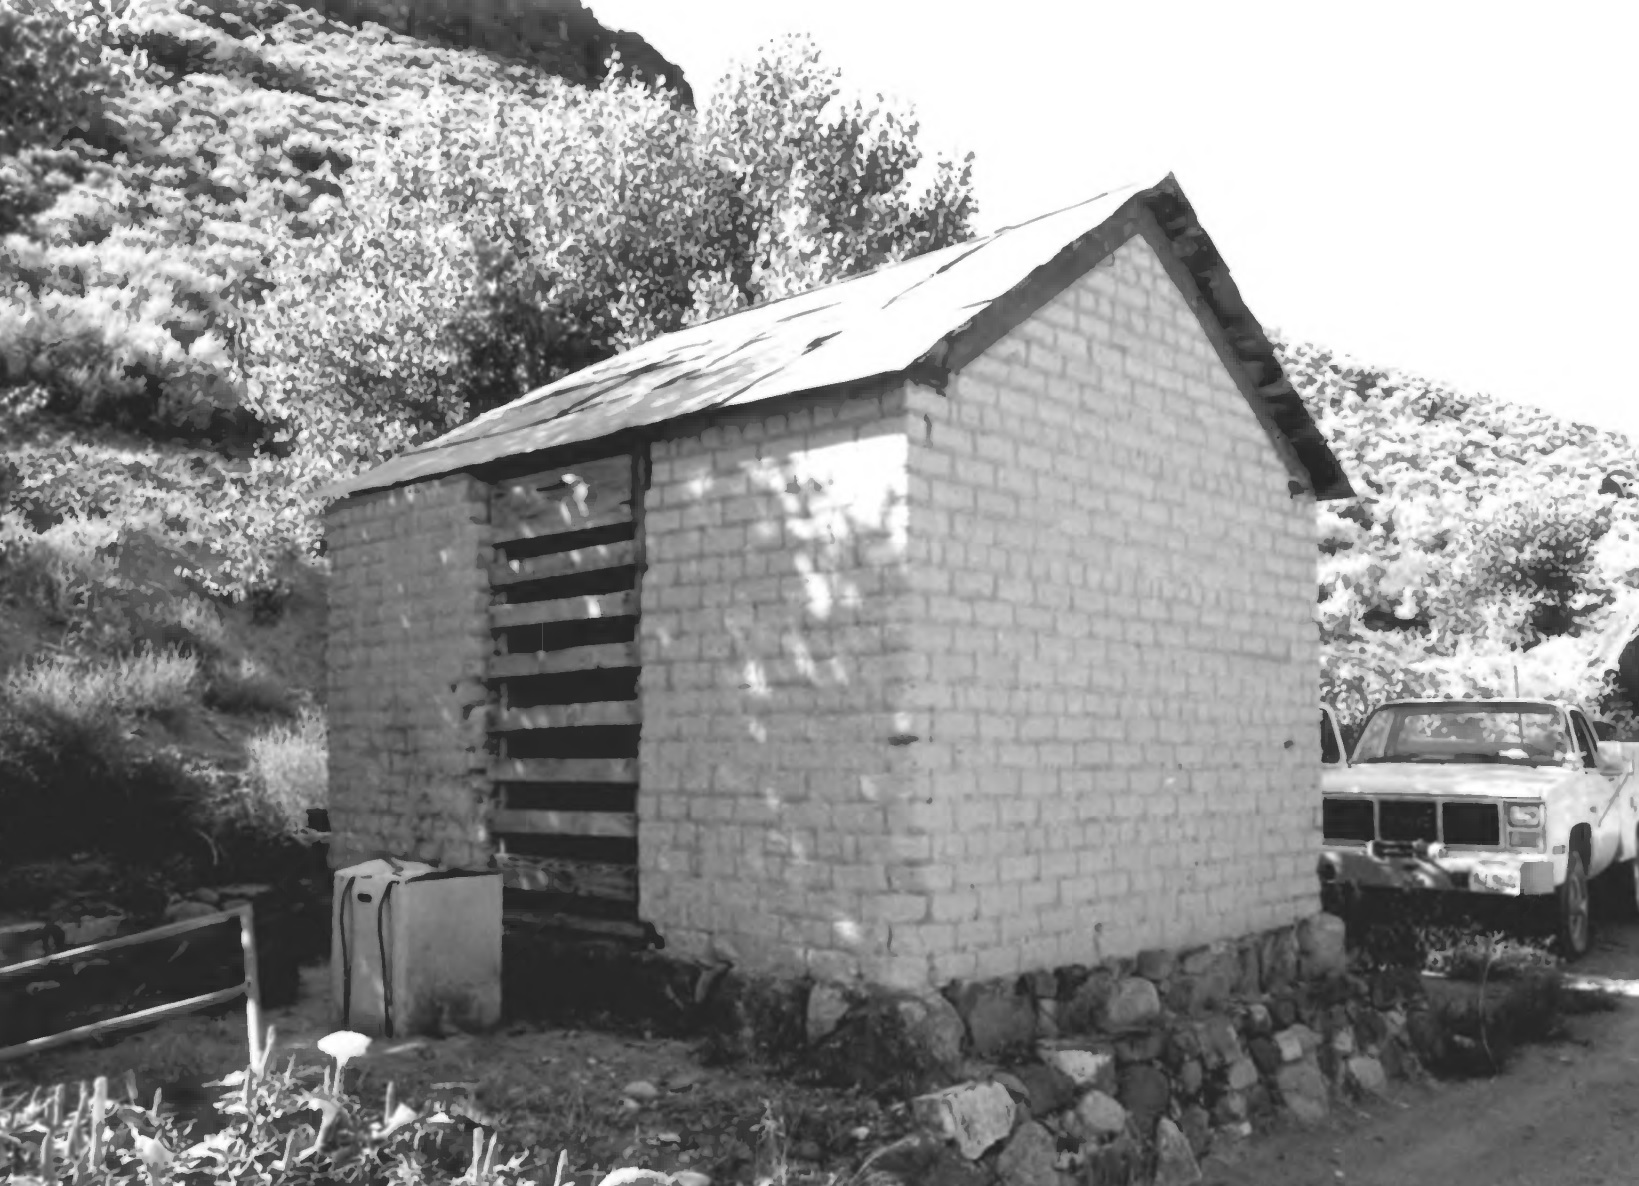 An ancillary adobe shed at the Gunlock Hydroelectric Power Plant